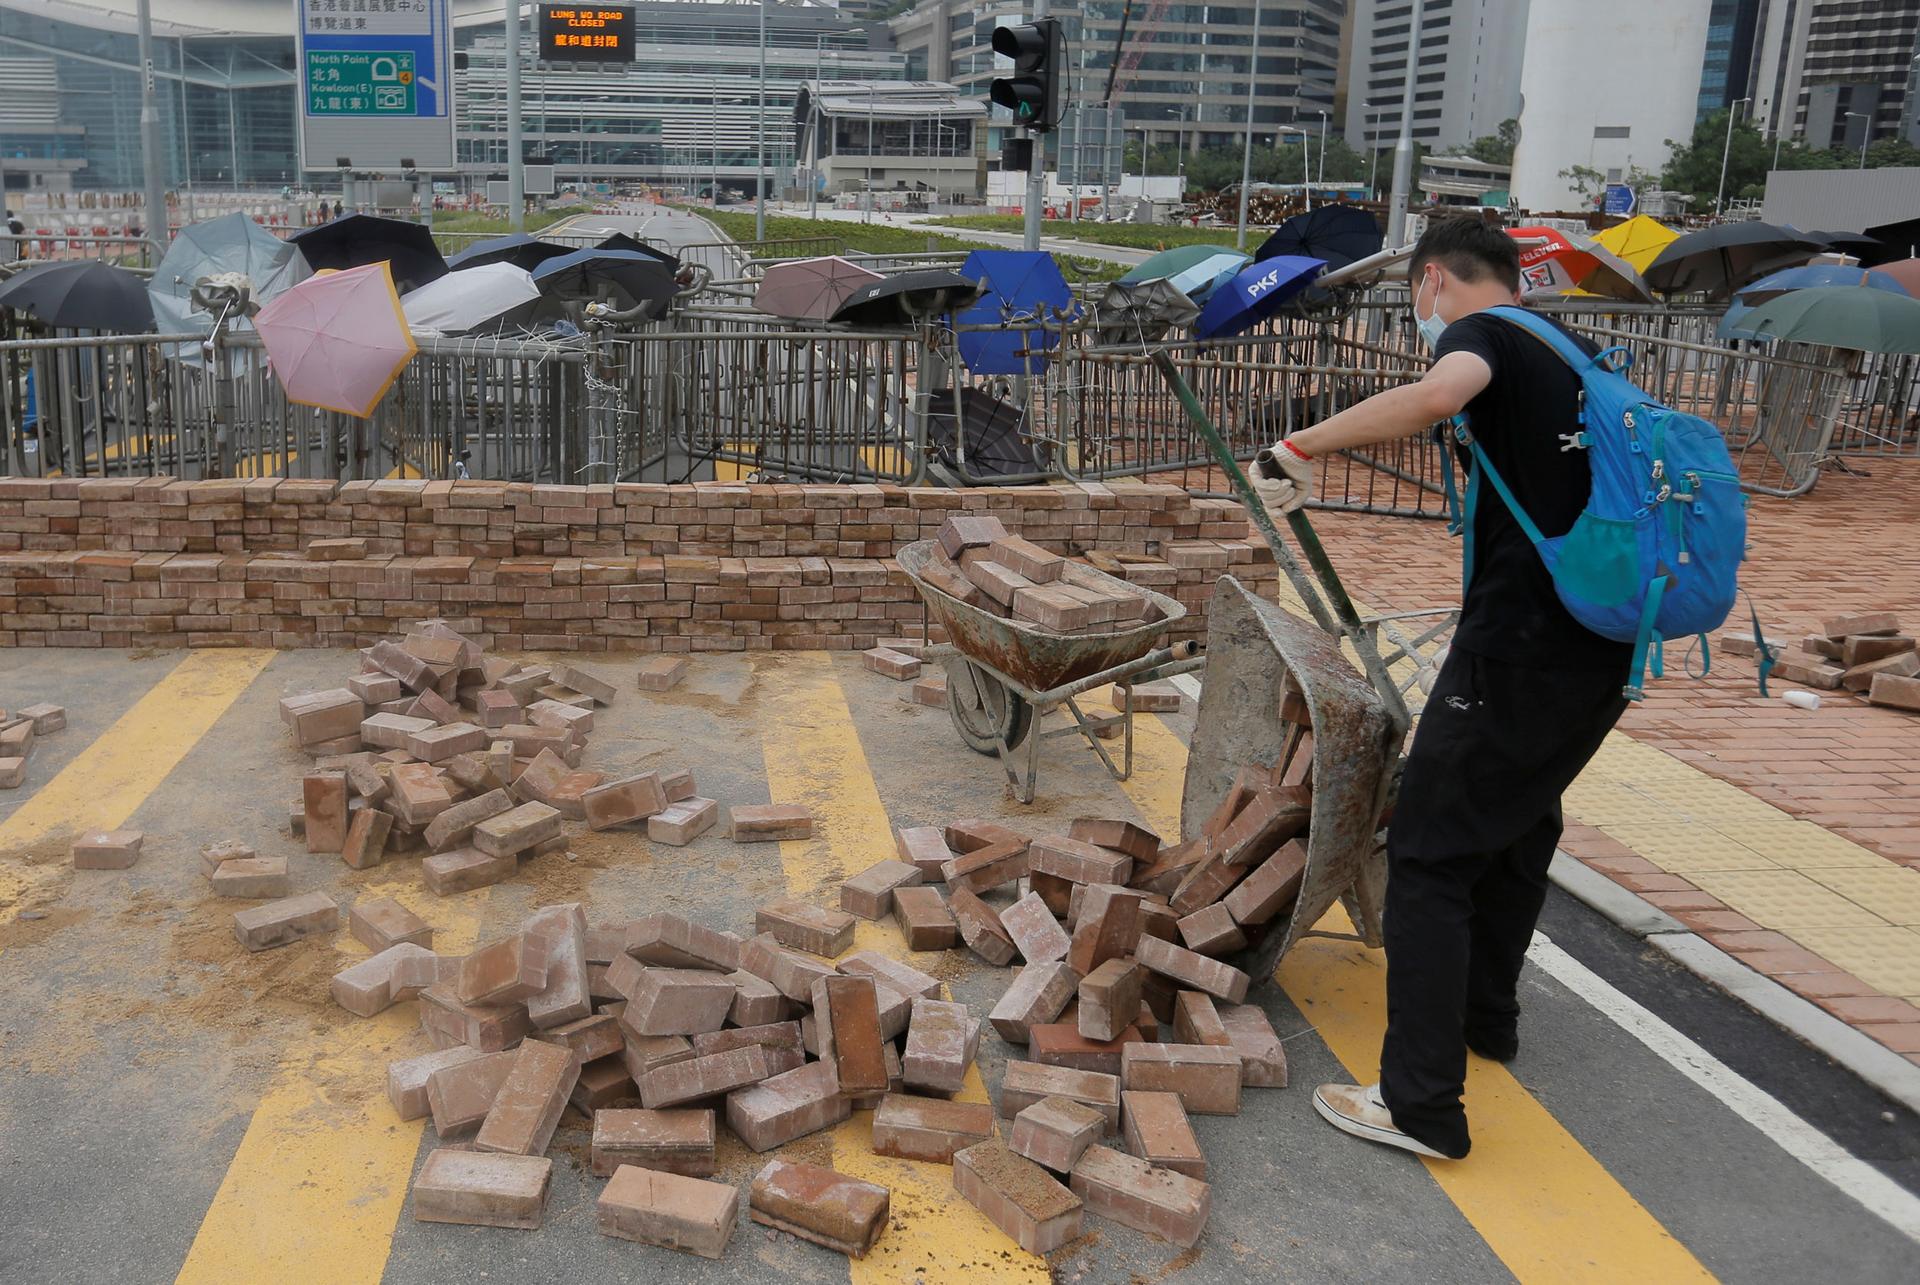 A man is shown wearing a blue backpack and dumping out a wheelbarrow of bricks onto the street.